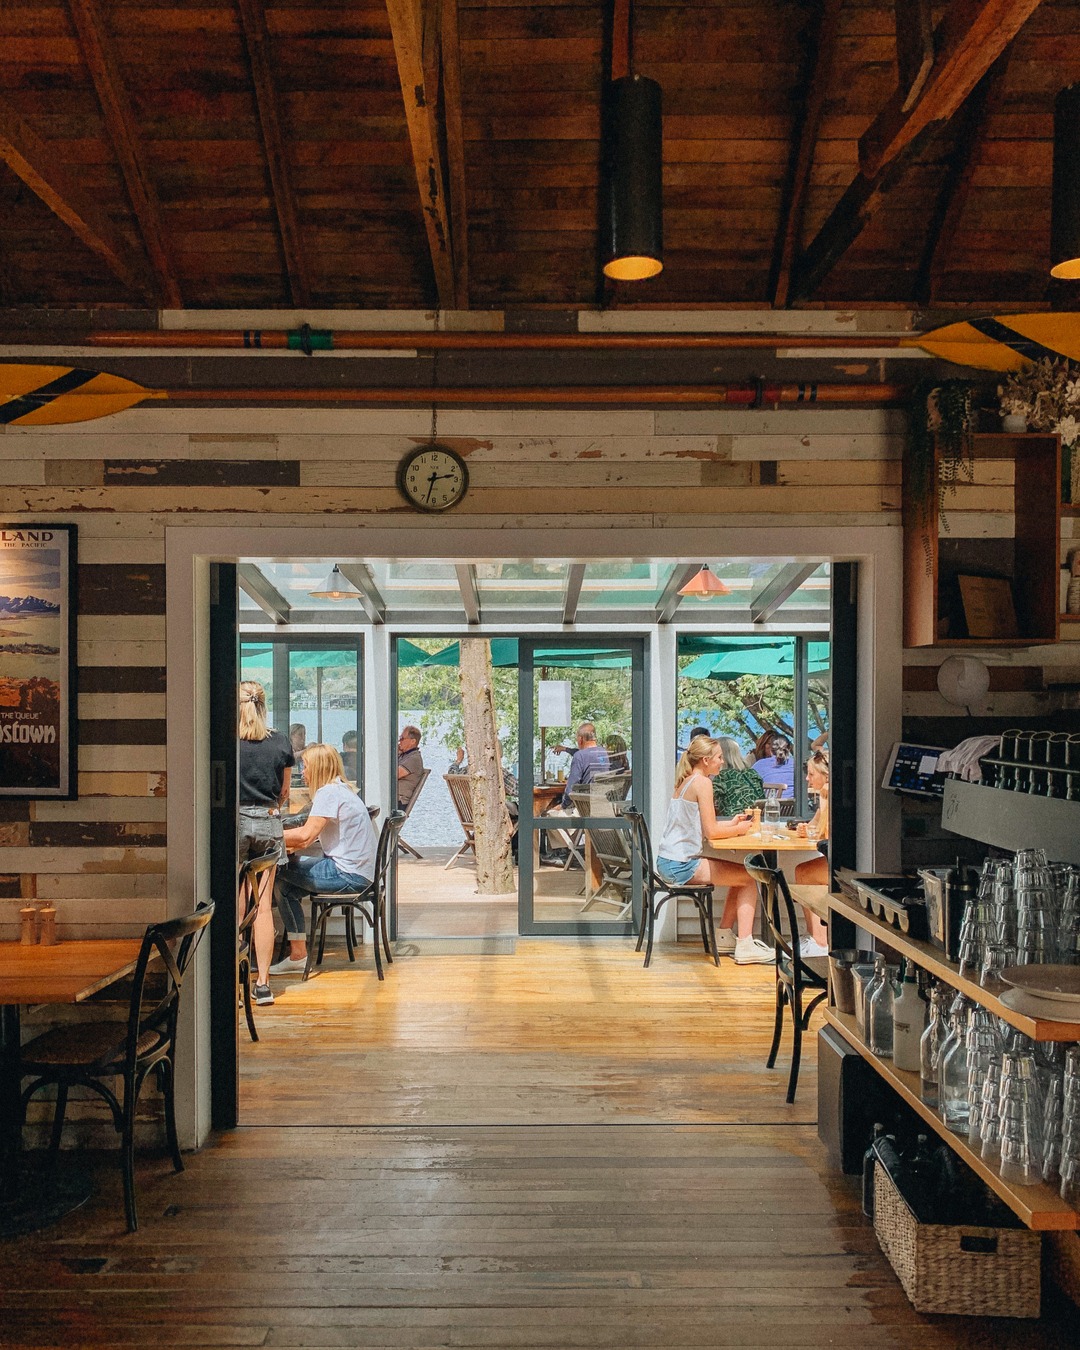 The Boat Shed Cafe and Bistro